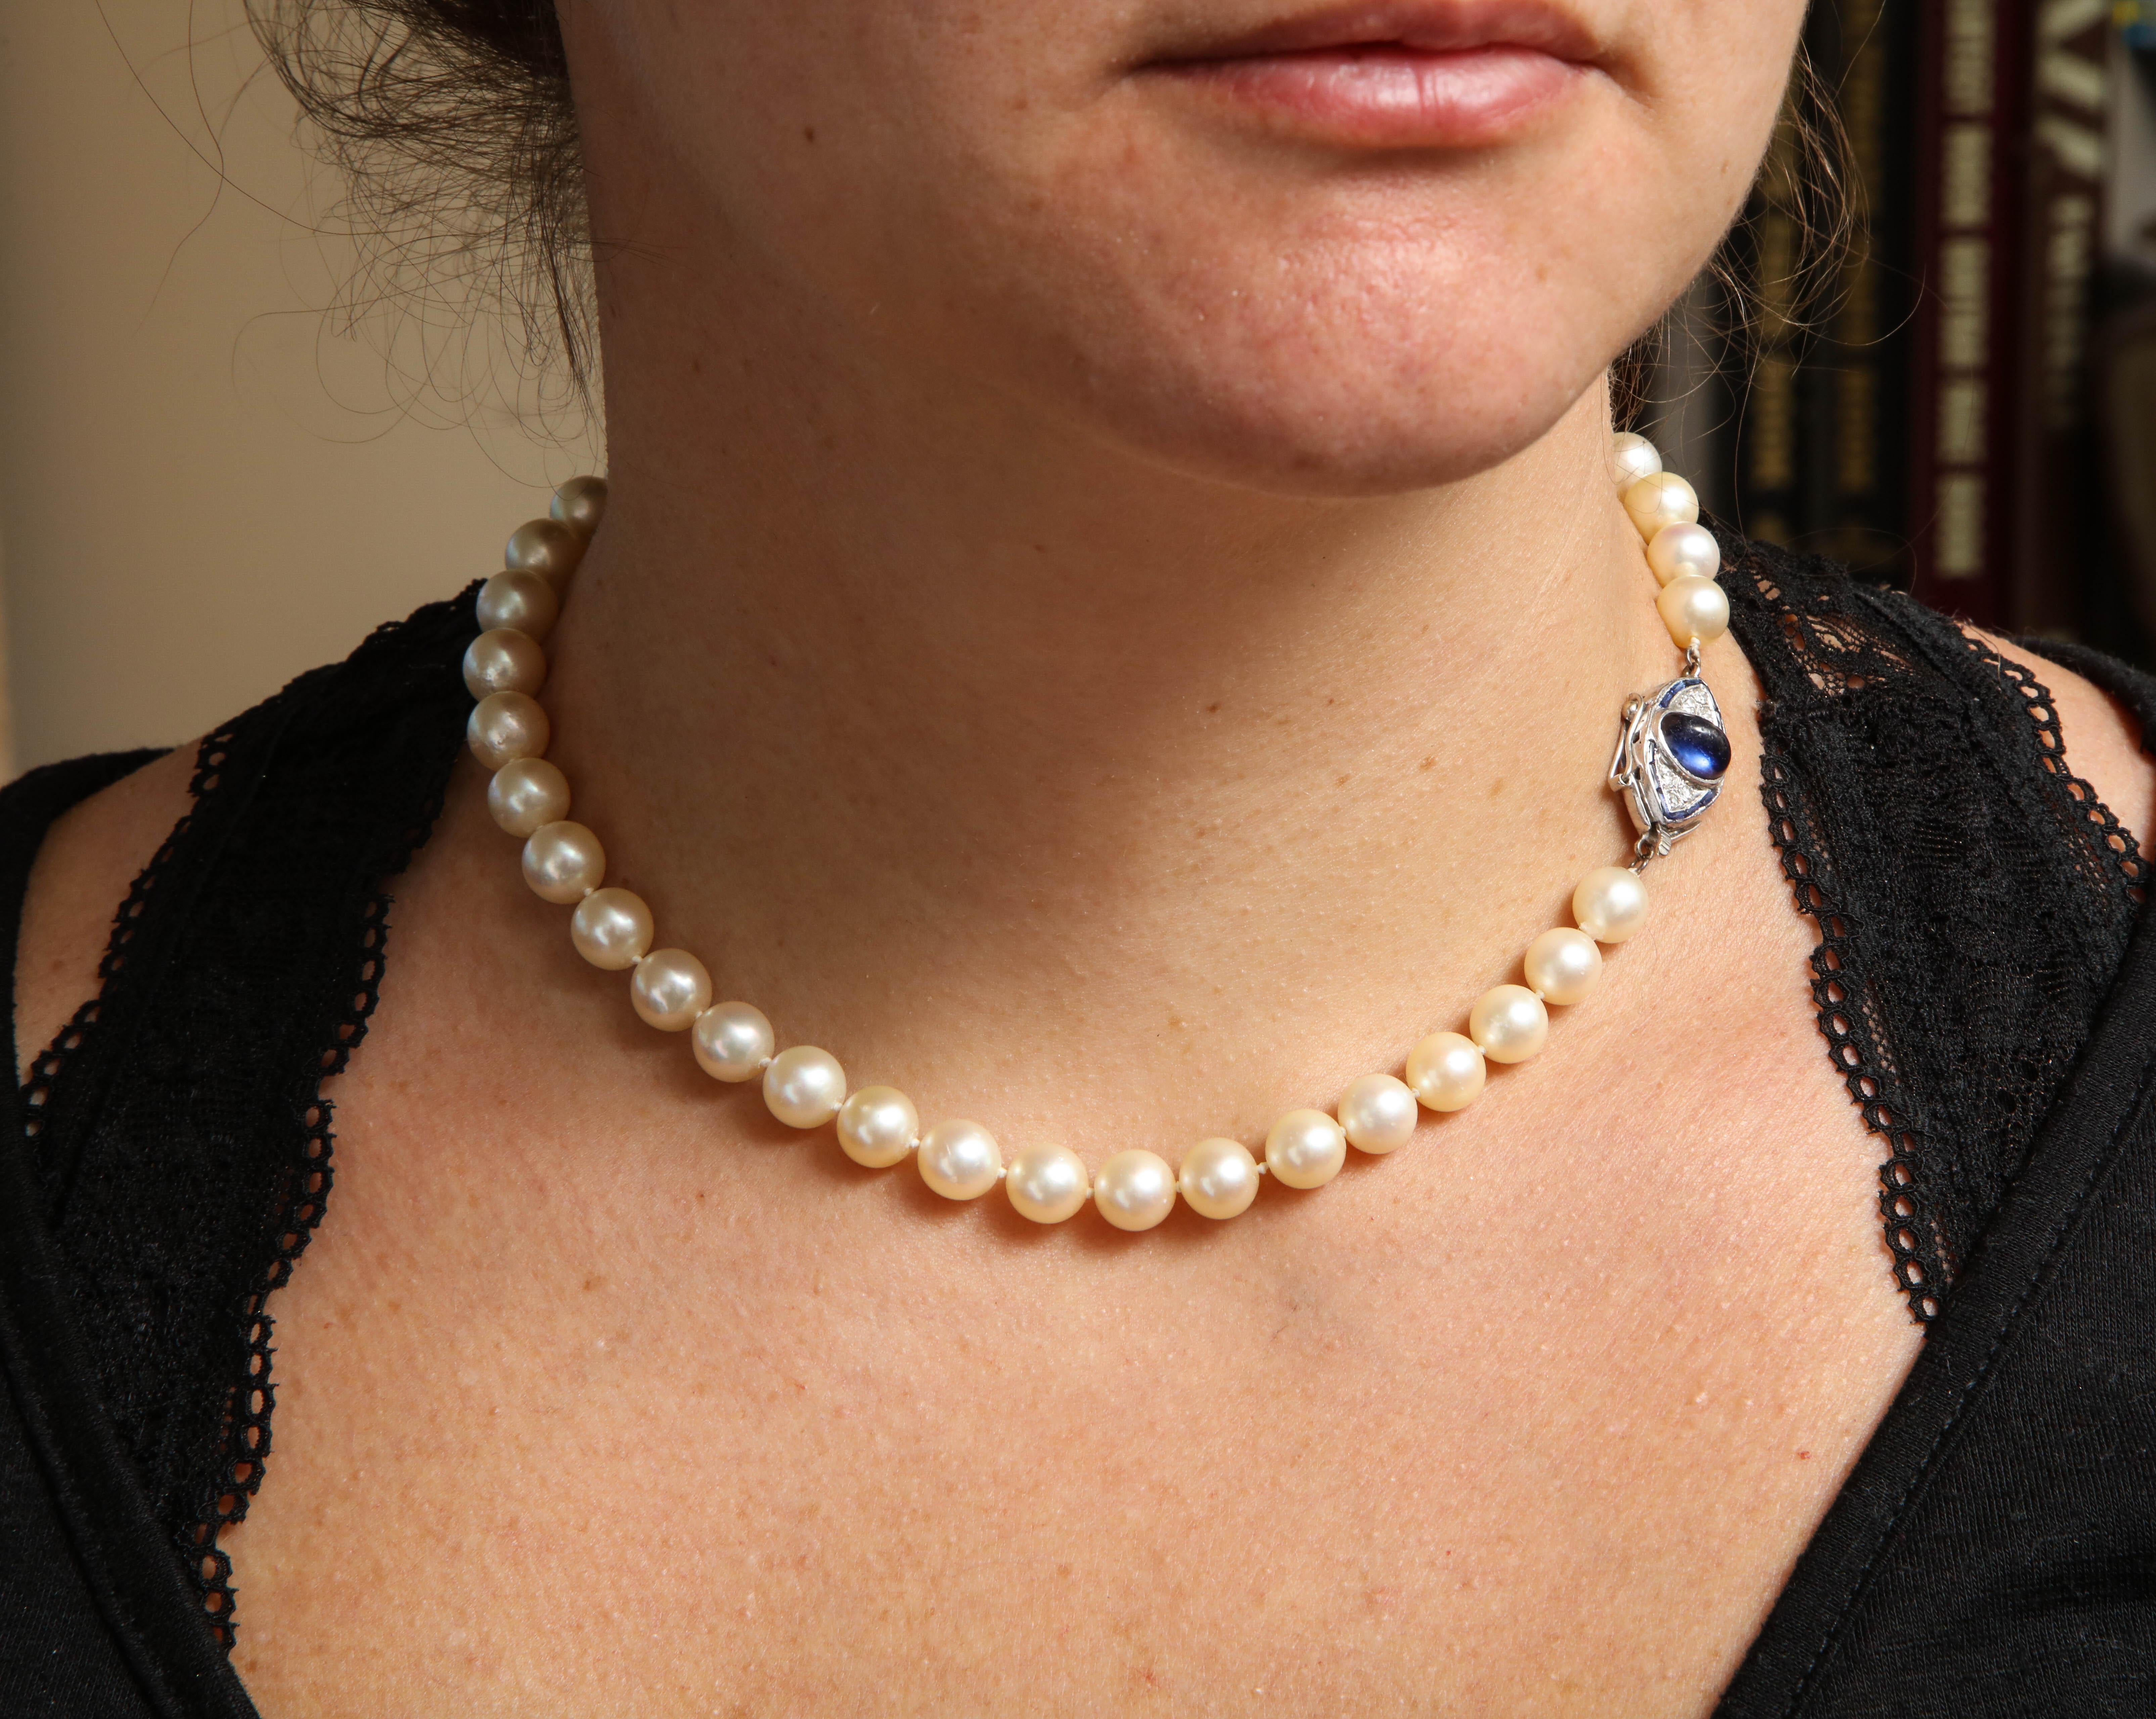 Women's Antique Art Deco Pearl Necklace with Sapphire Clasp